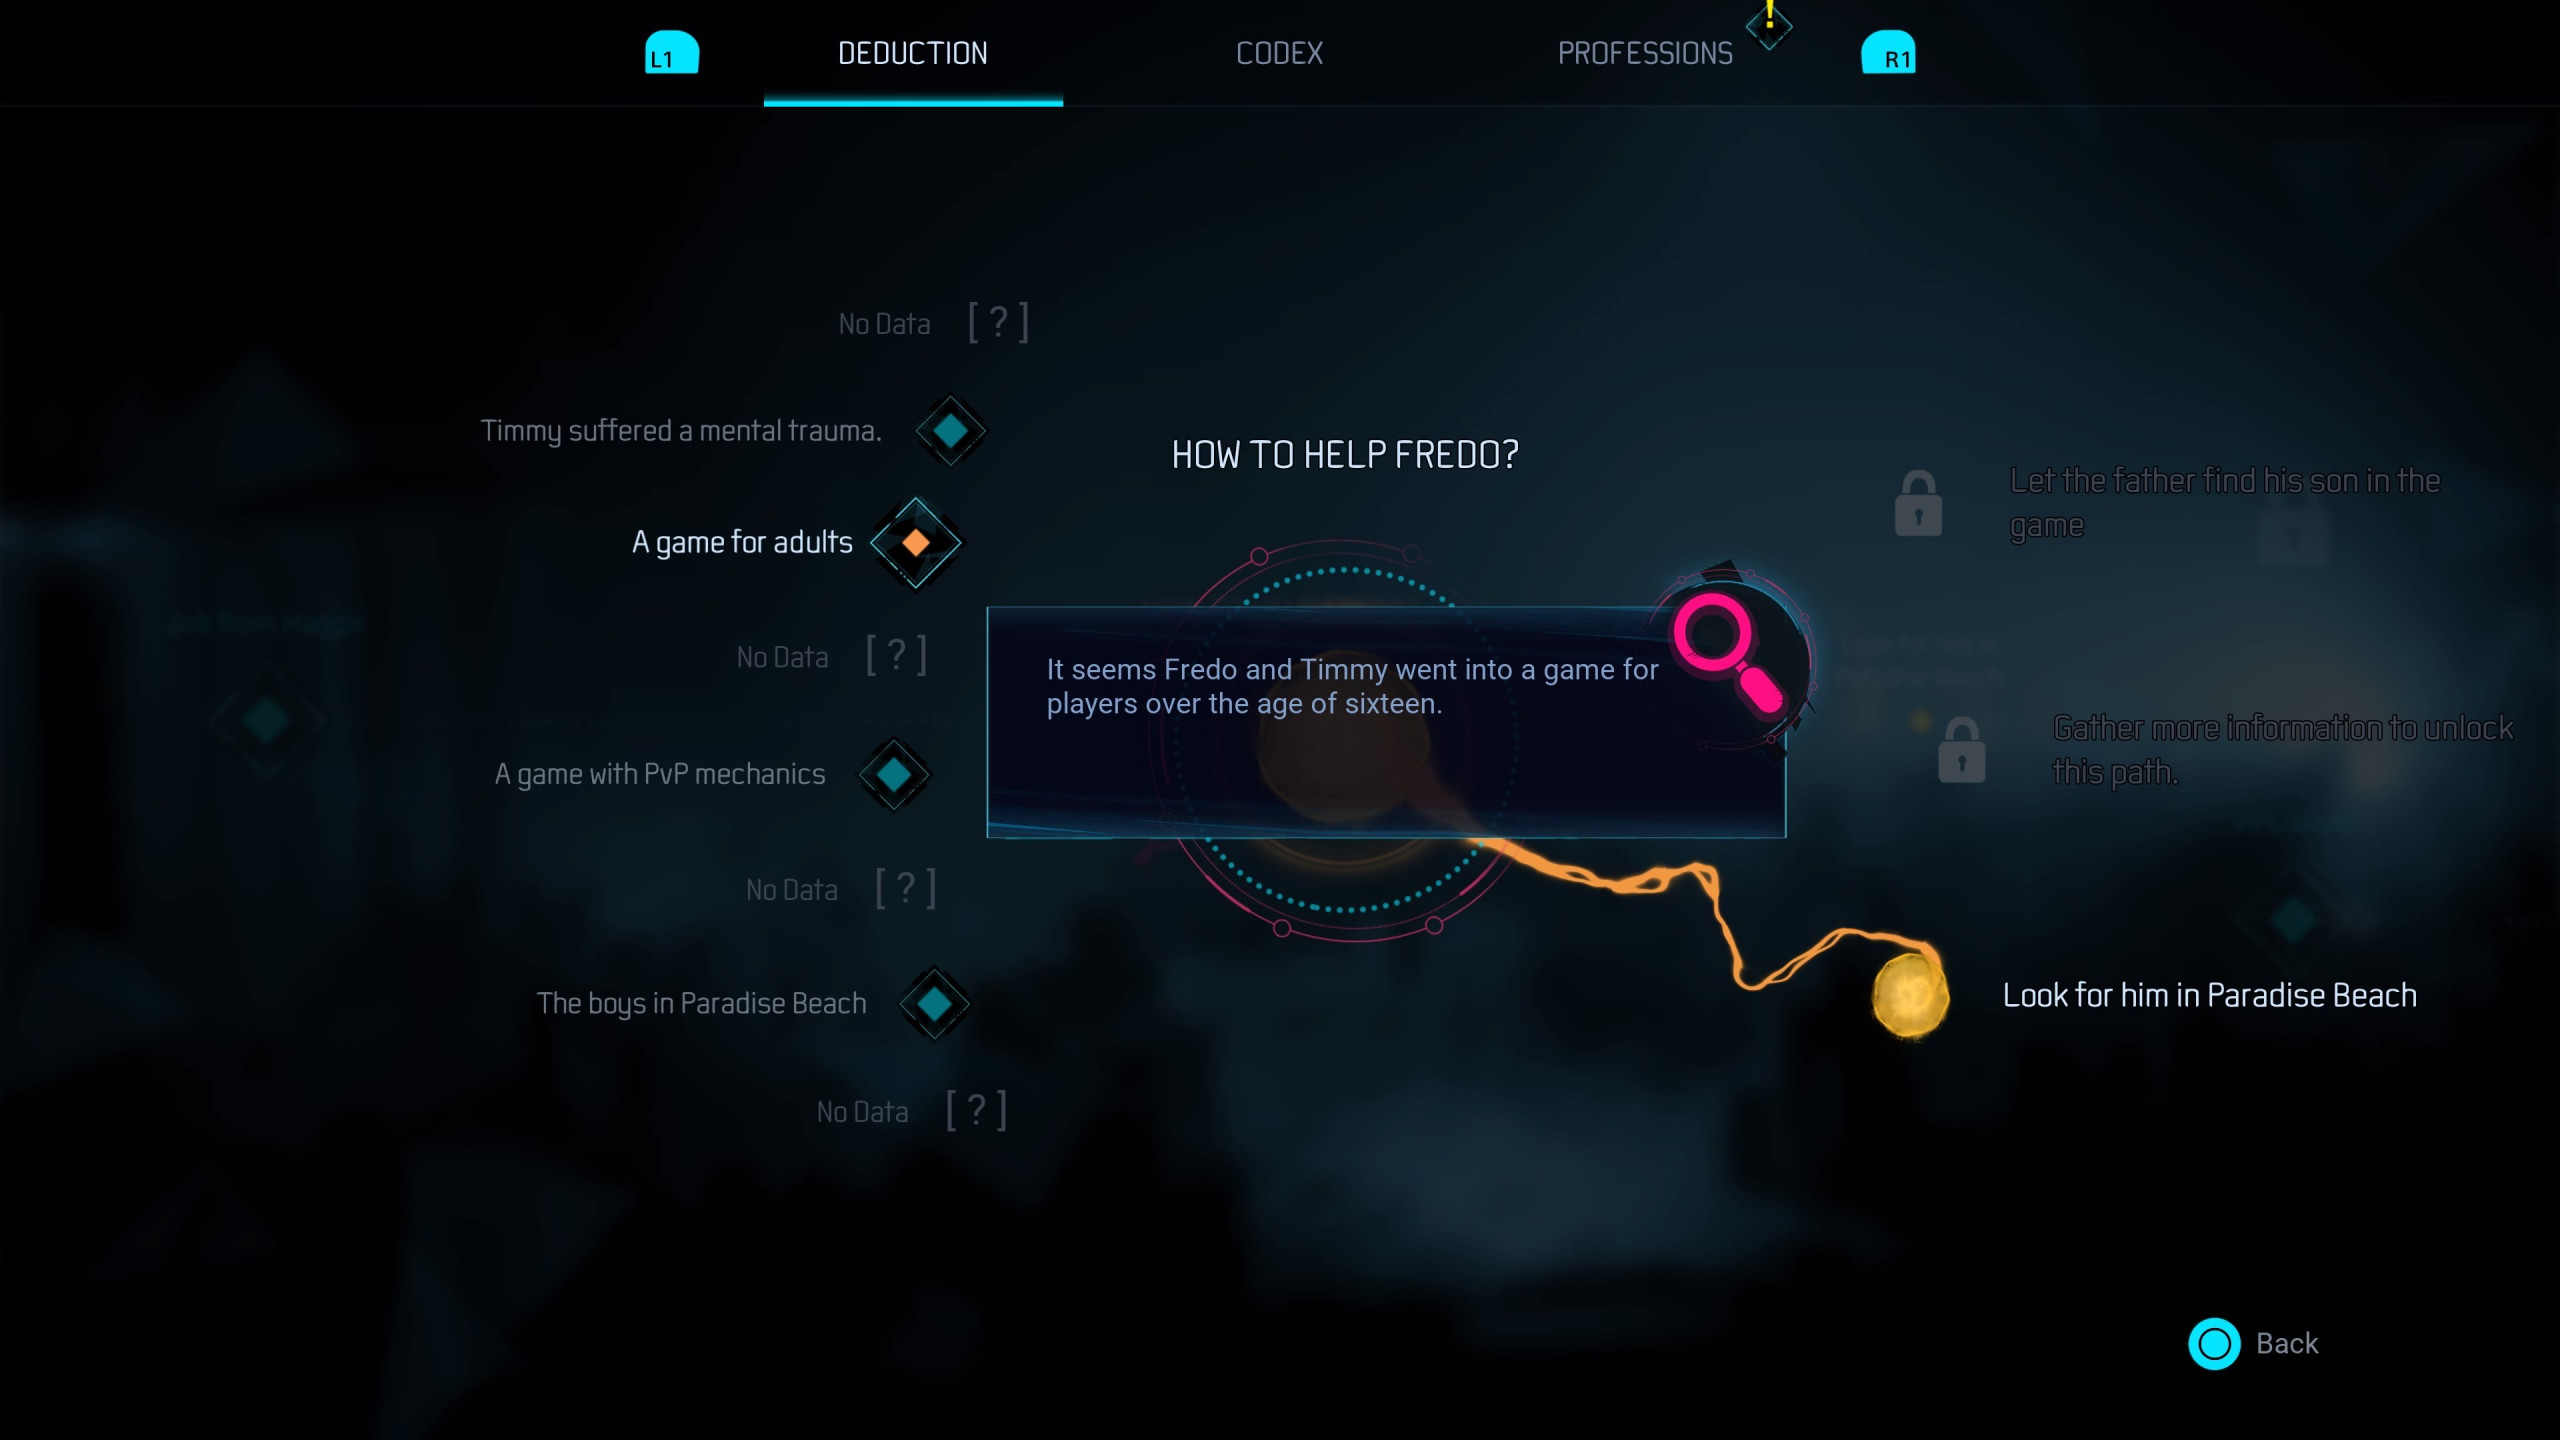 This picture shows the deduction menu whereby the player is able to see the deductions that have been made so far due to the clues that have been found.